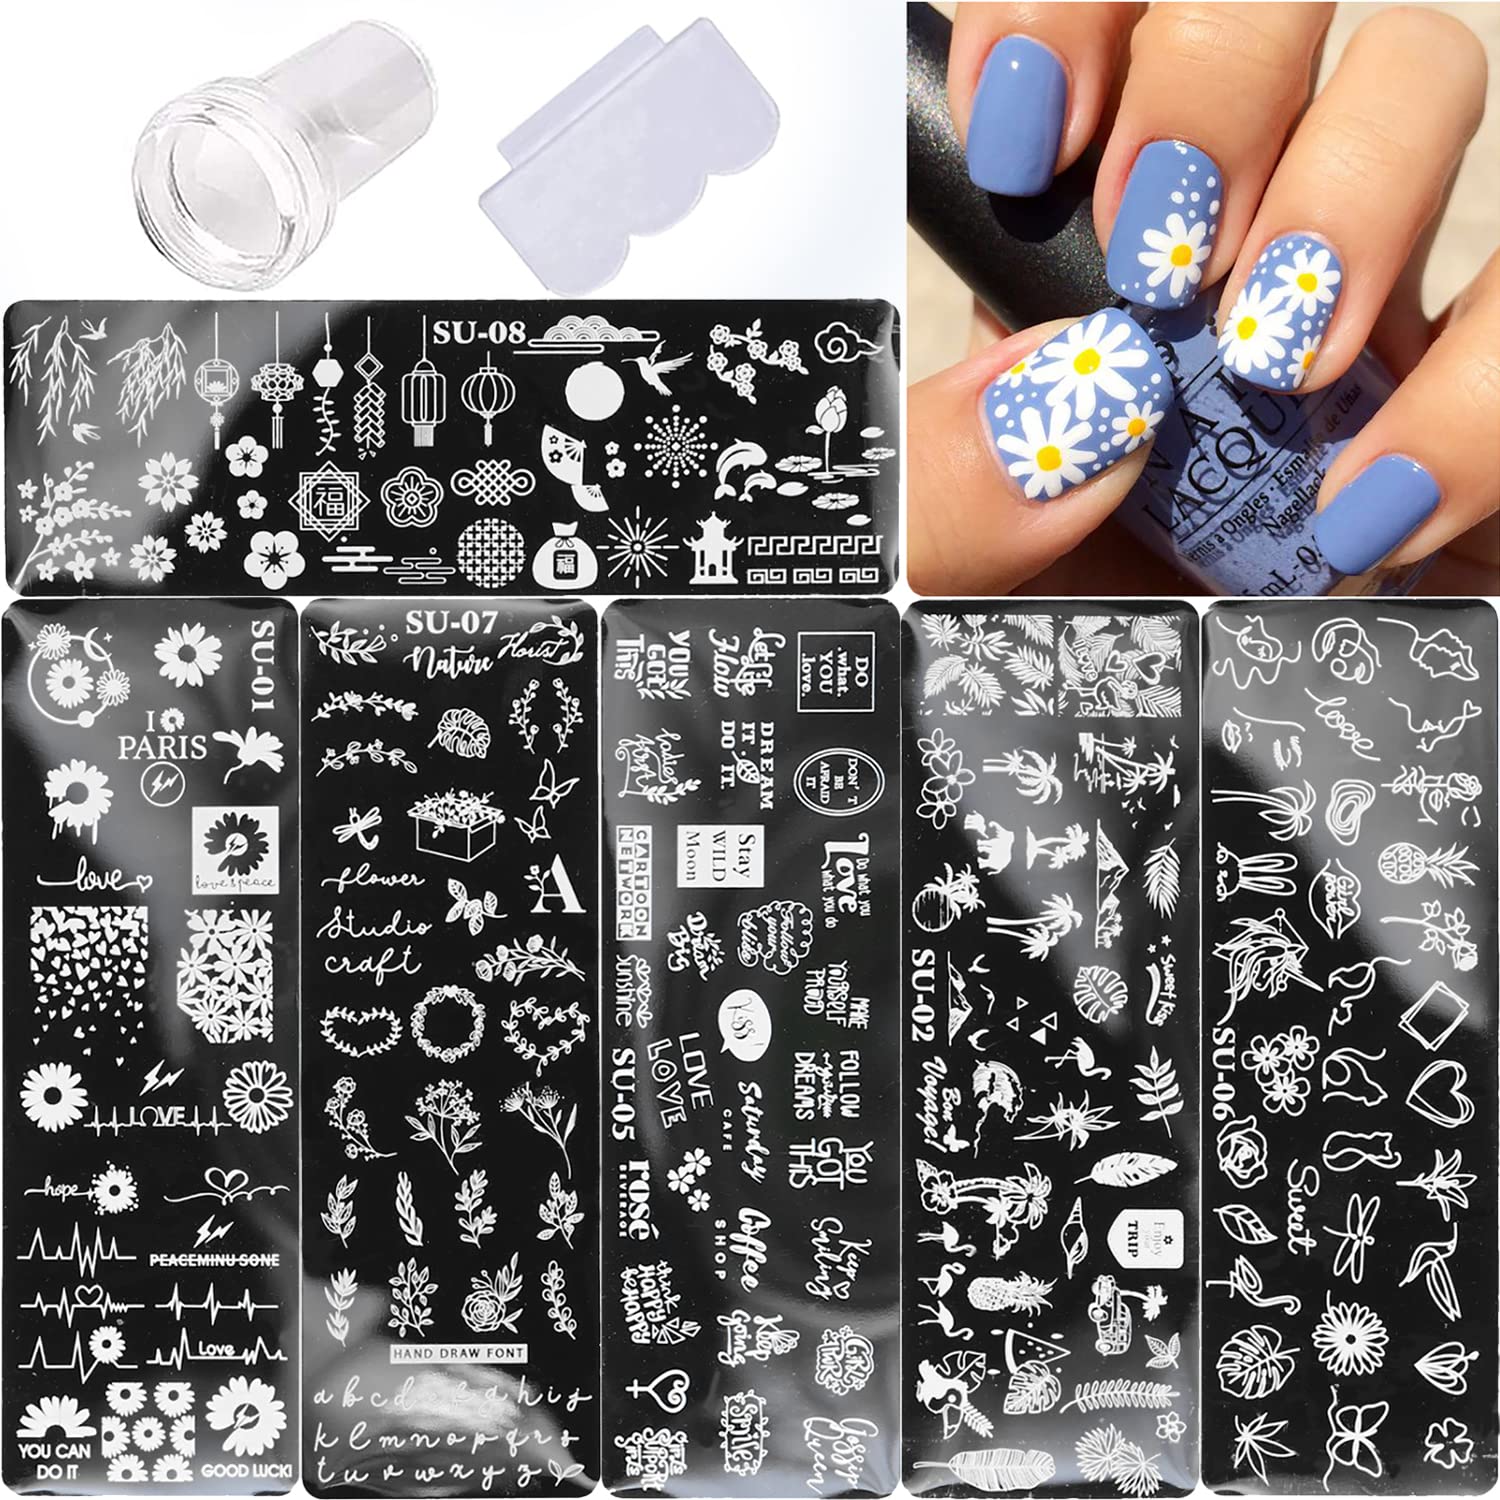 Pueen Nail Stamping Starter Kit - Vibrant Scents